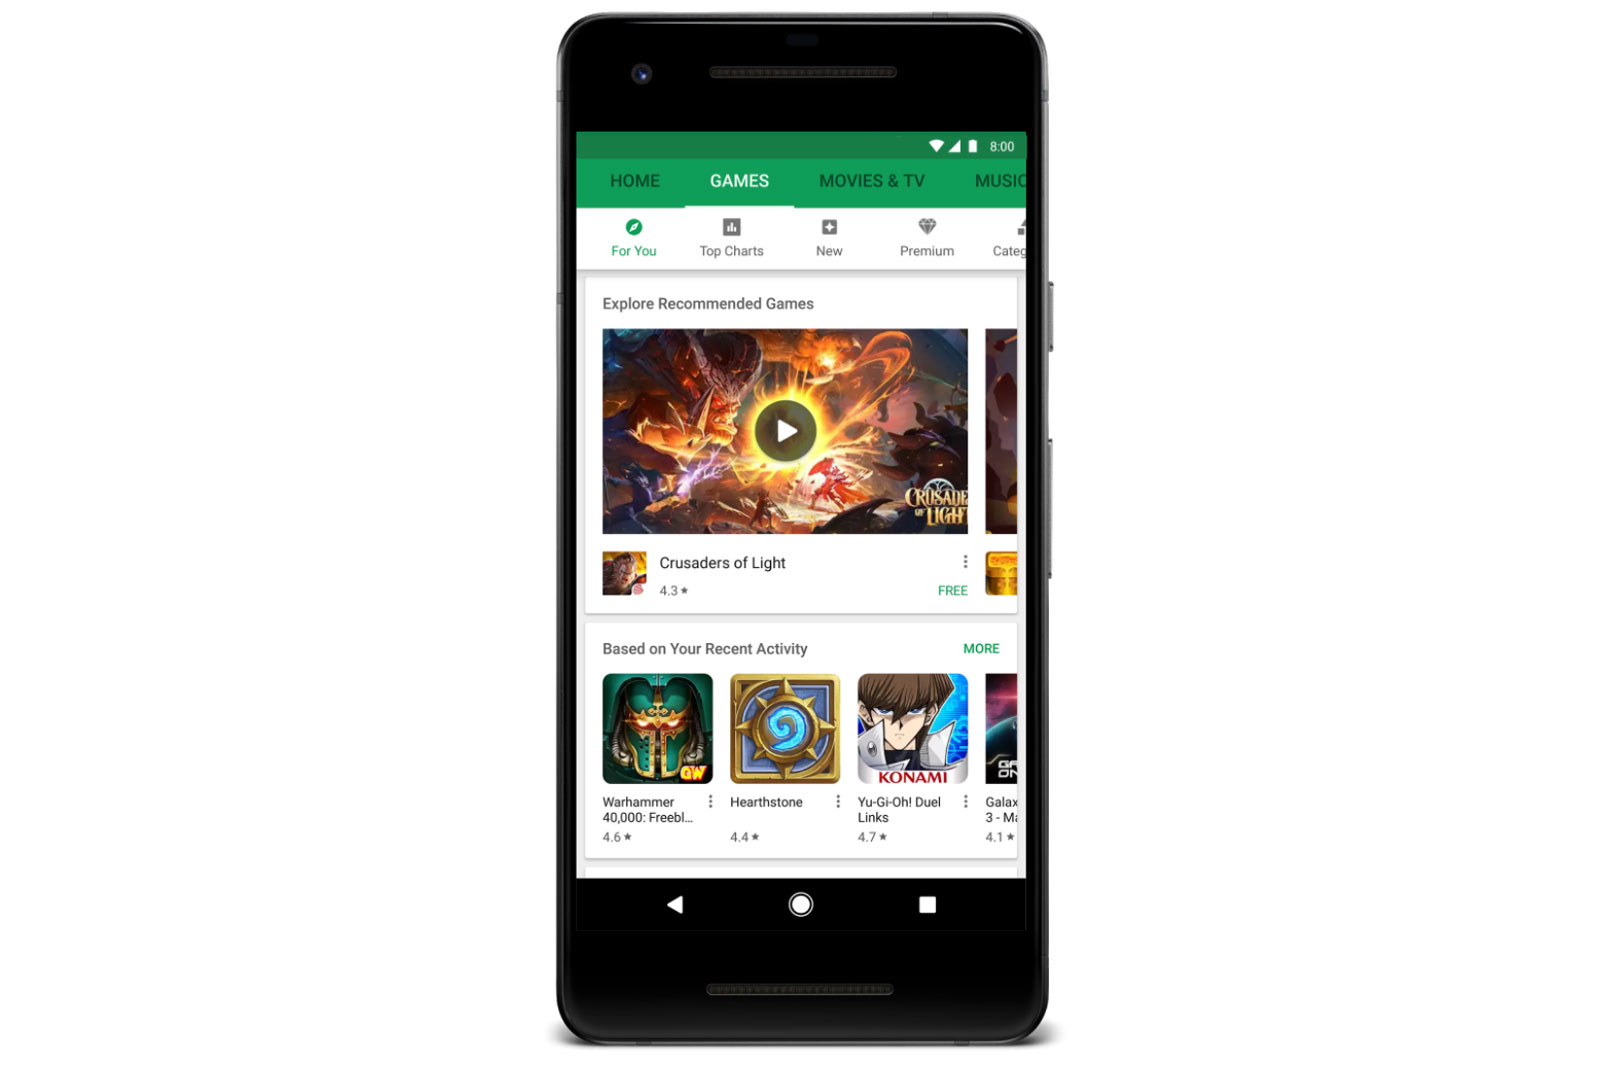 Google Play Games section